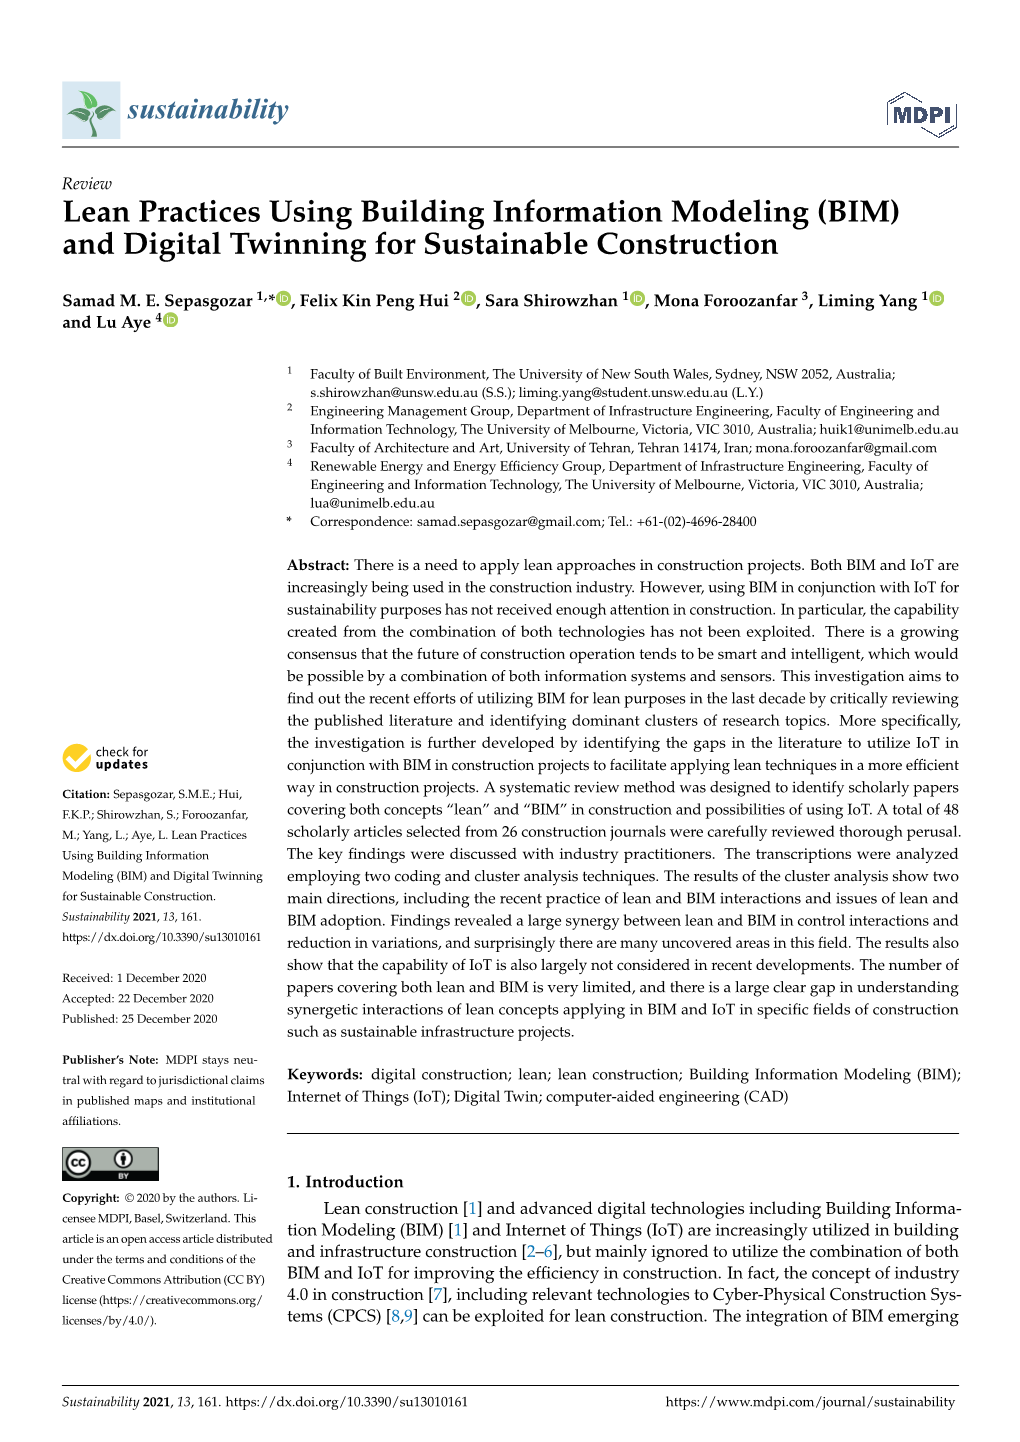 BIM) and Digital Twinning for Sustainable Construction